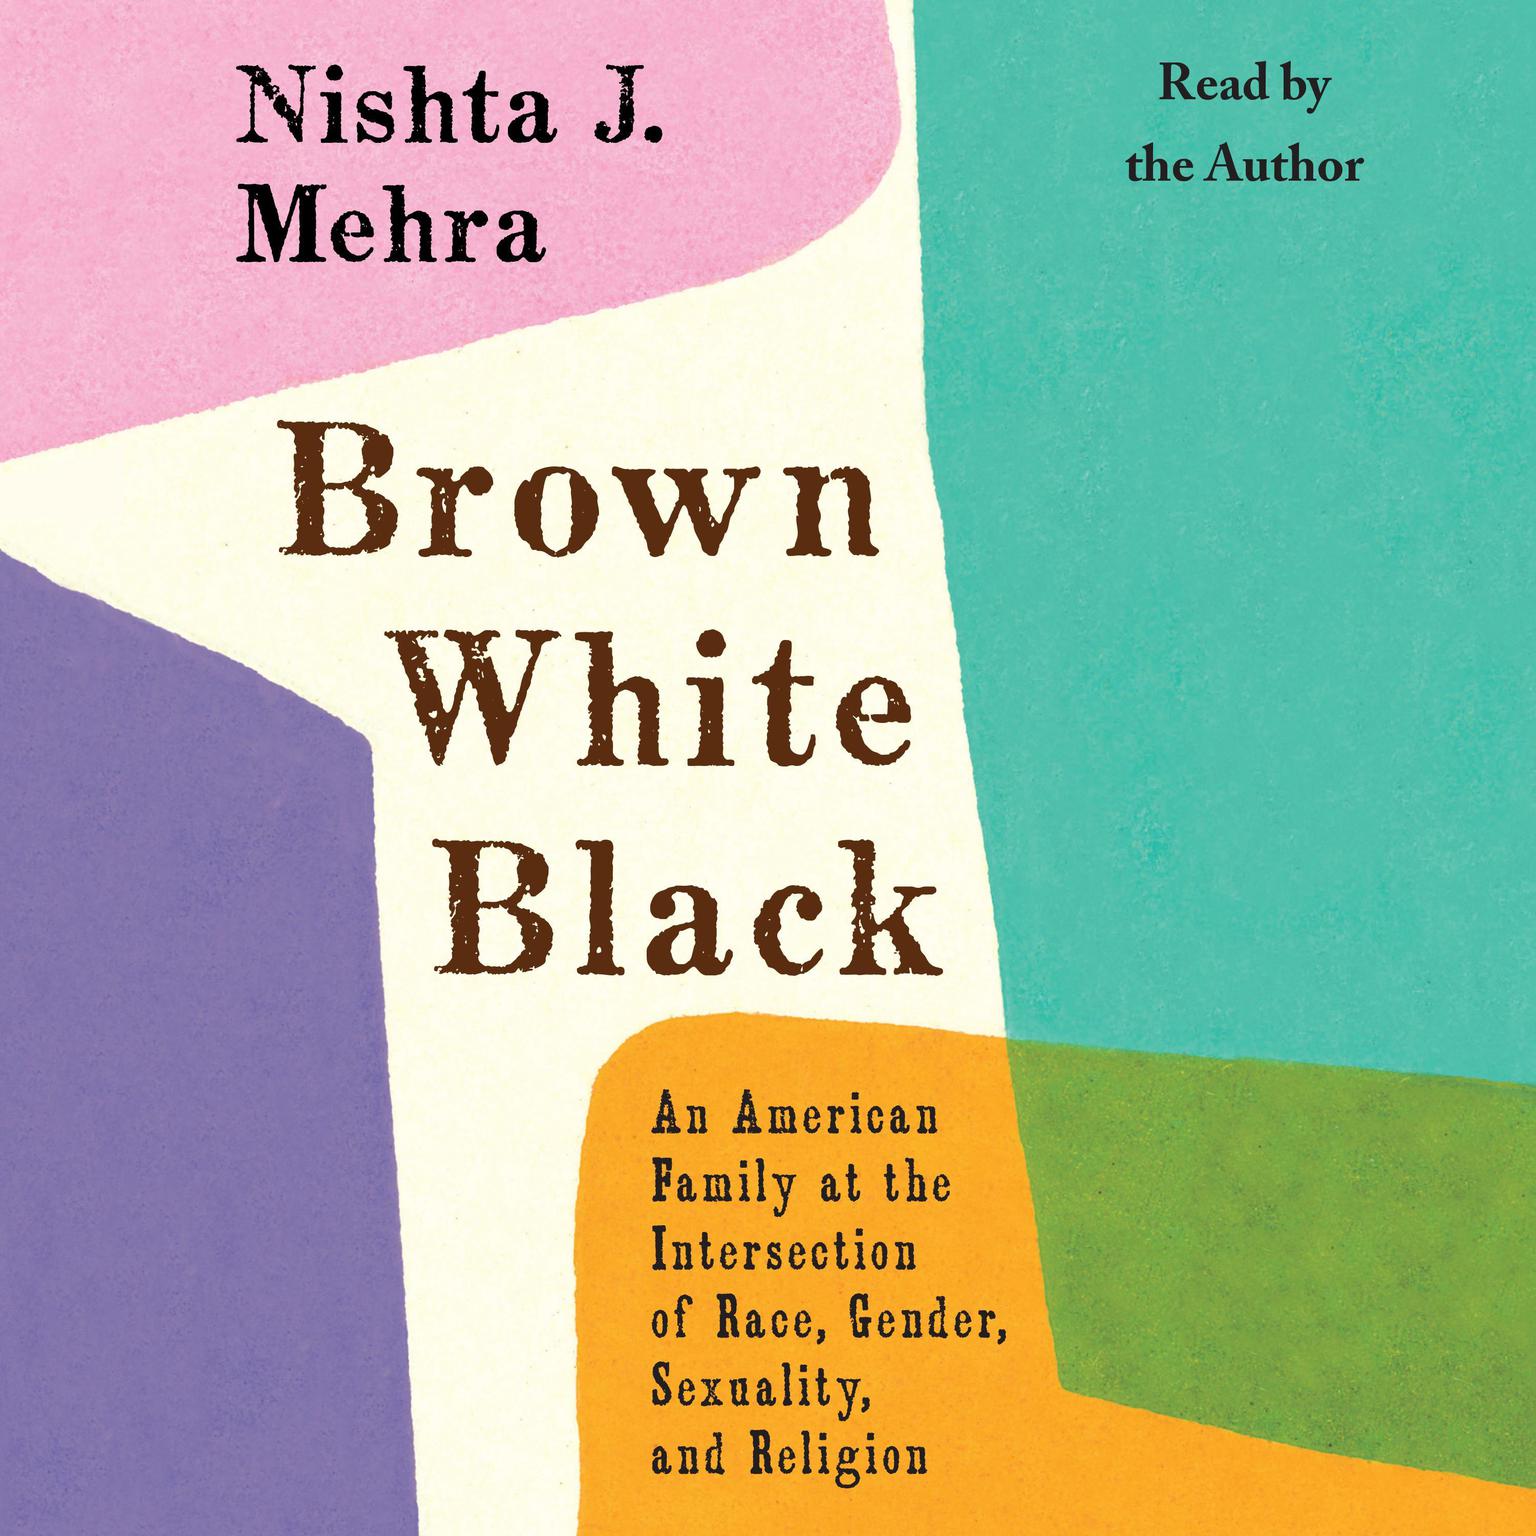 Brown White Black: An American Family at the Intersection of Race, Gender, Sexuality, and Religion Audiobook, by Nishta J. Mehra